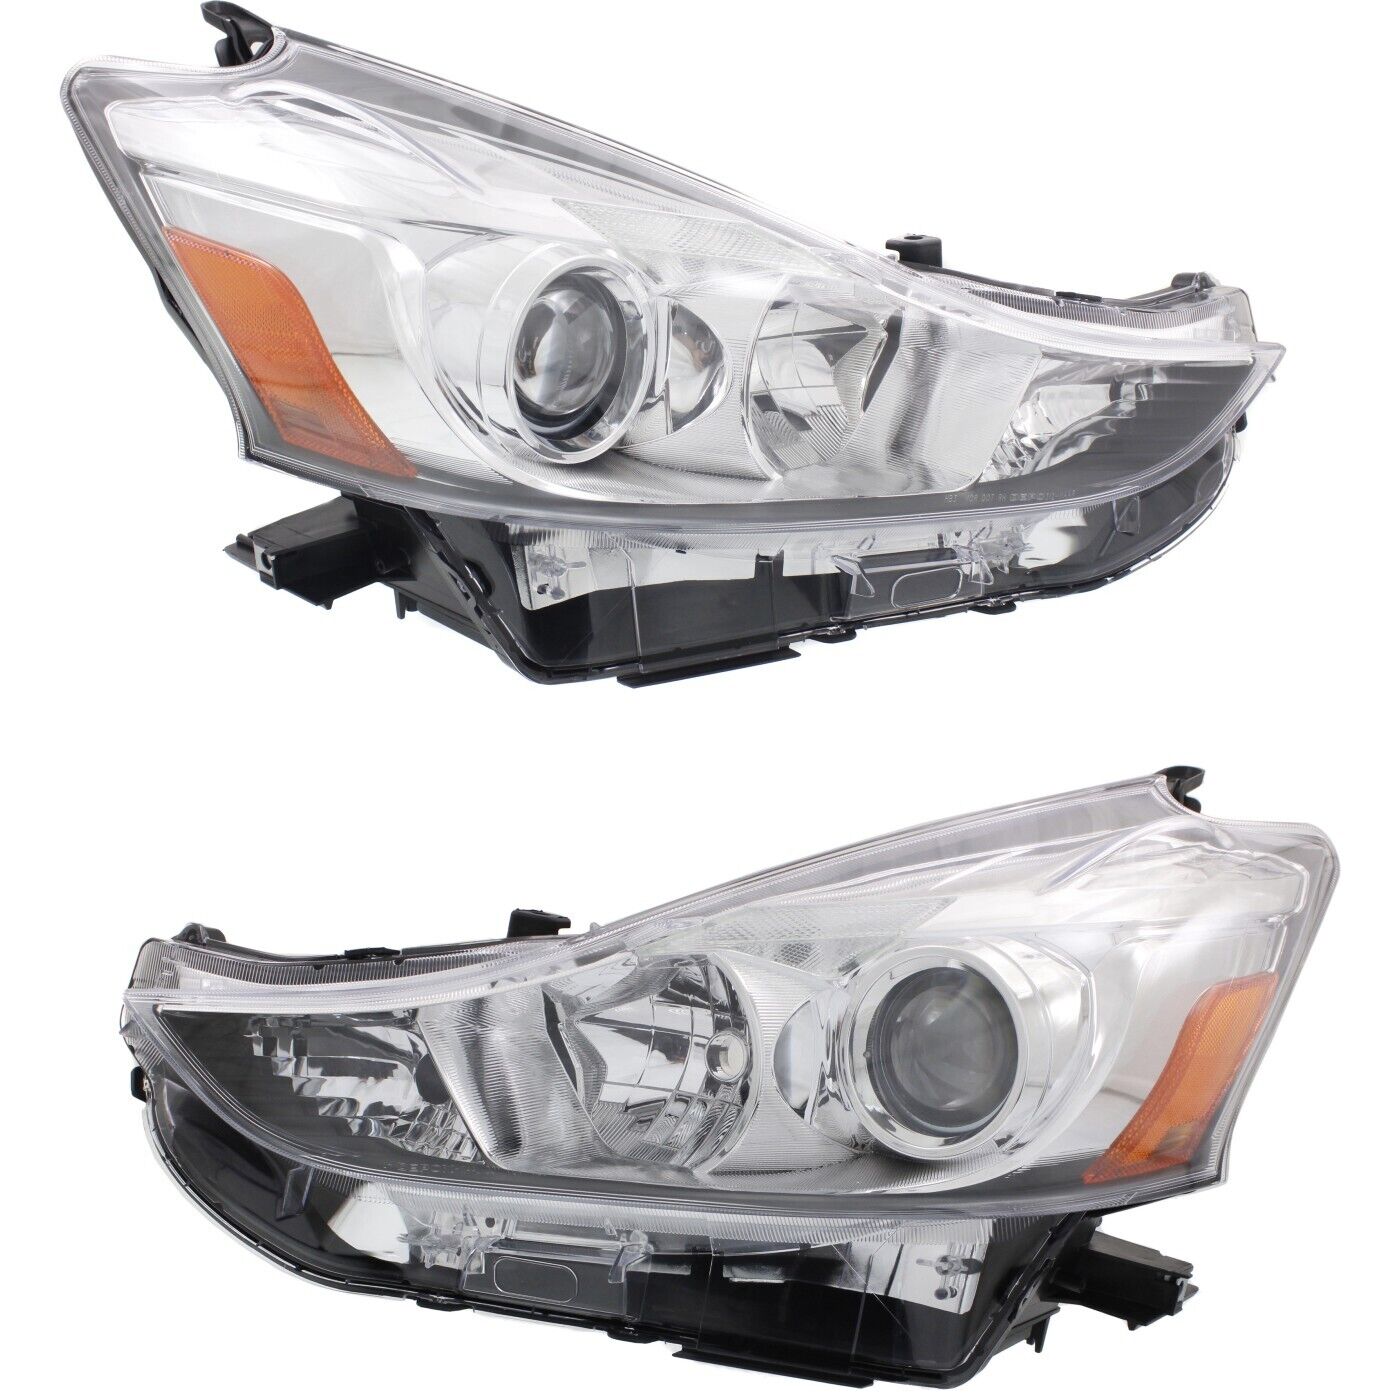 Headlight Set For 2015 2016 2017 Toyota Prius V Left and Right 2Pc